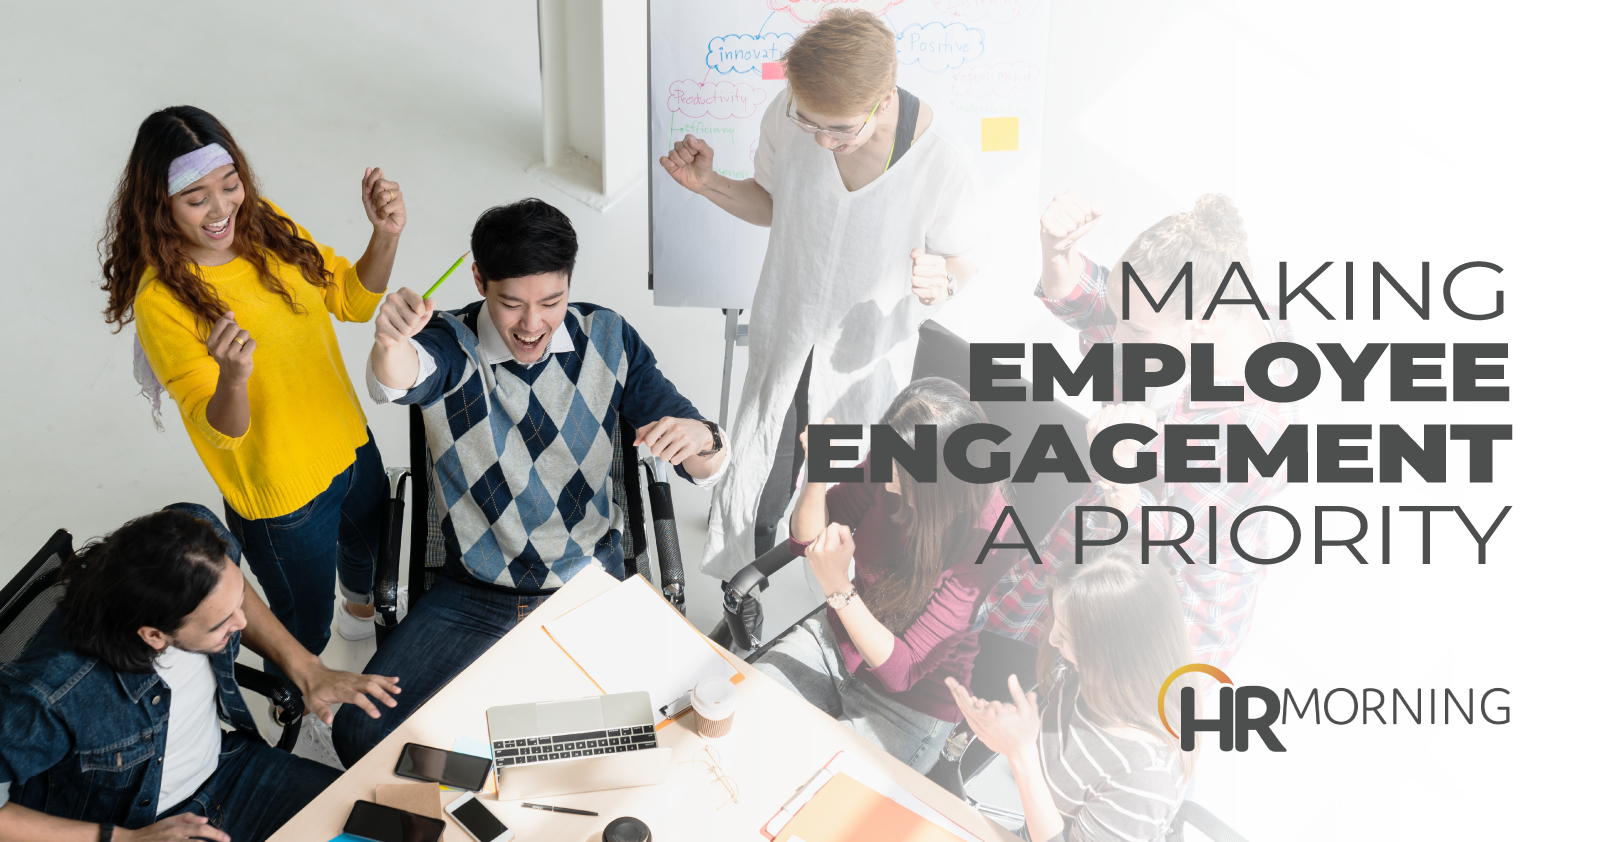 Making employee engagement a priority